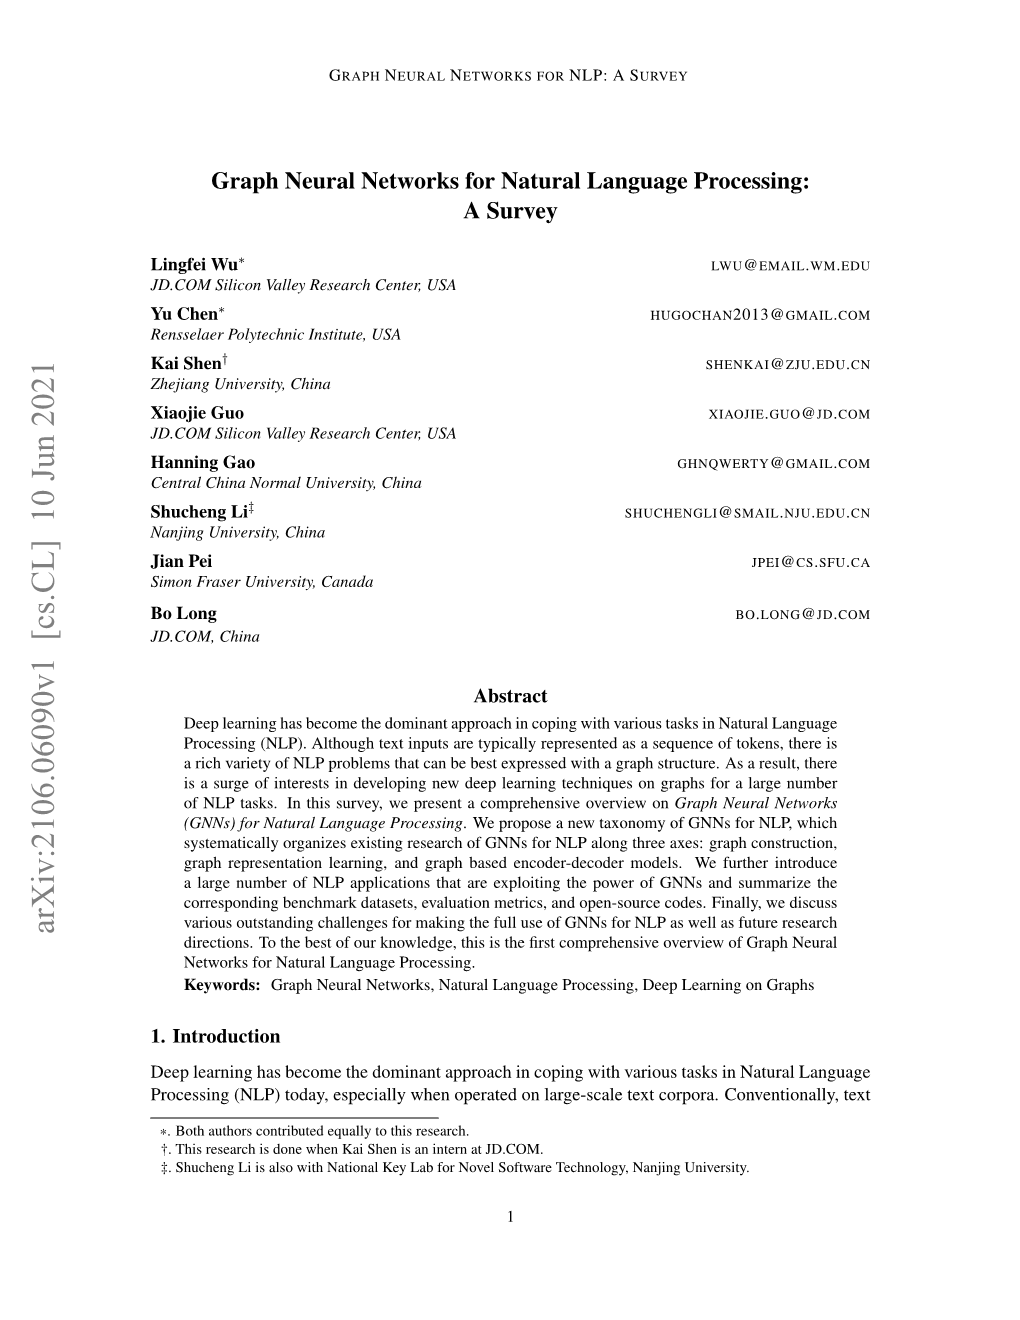 Graph Neural Networks for Natural Language Processing: a Survey